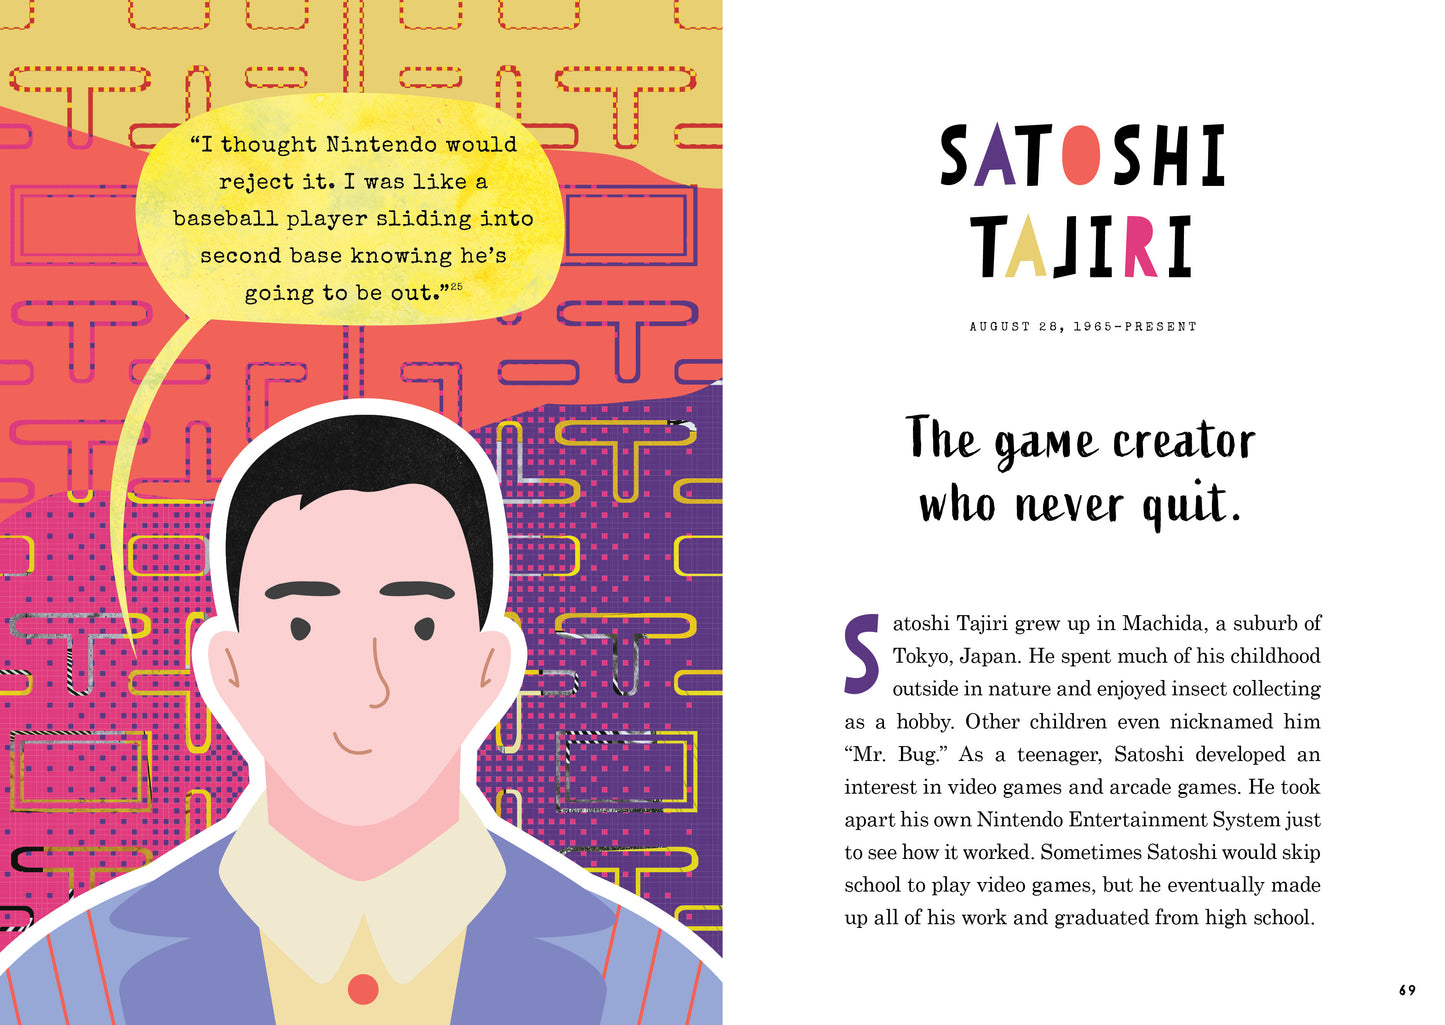 Grit: Inspiring Stories for When the Going Gets Tough